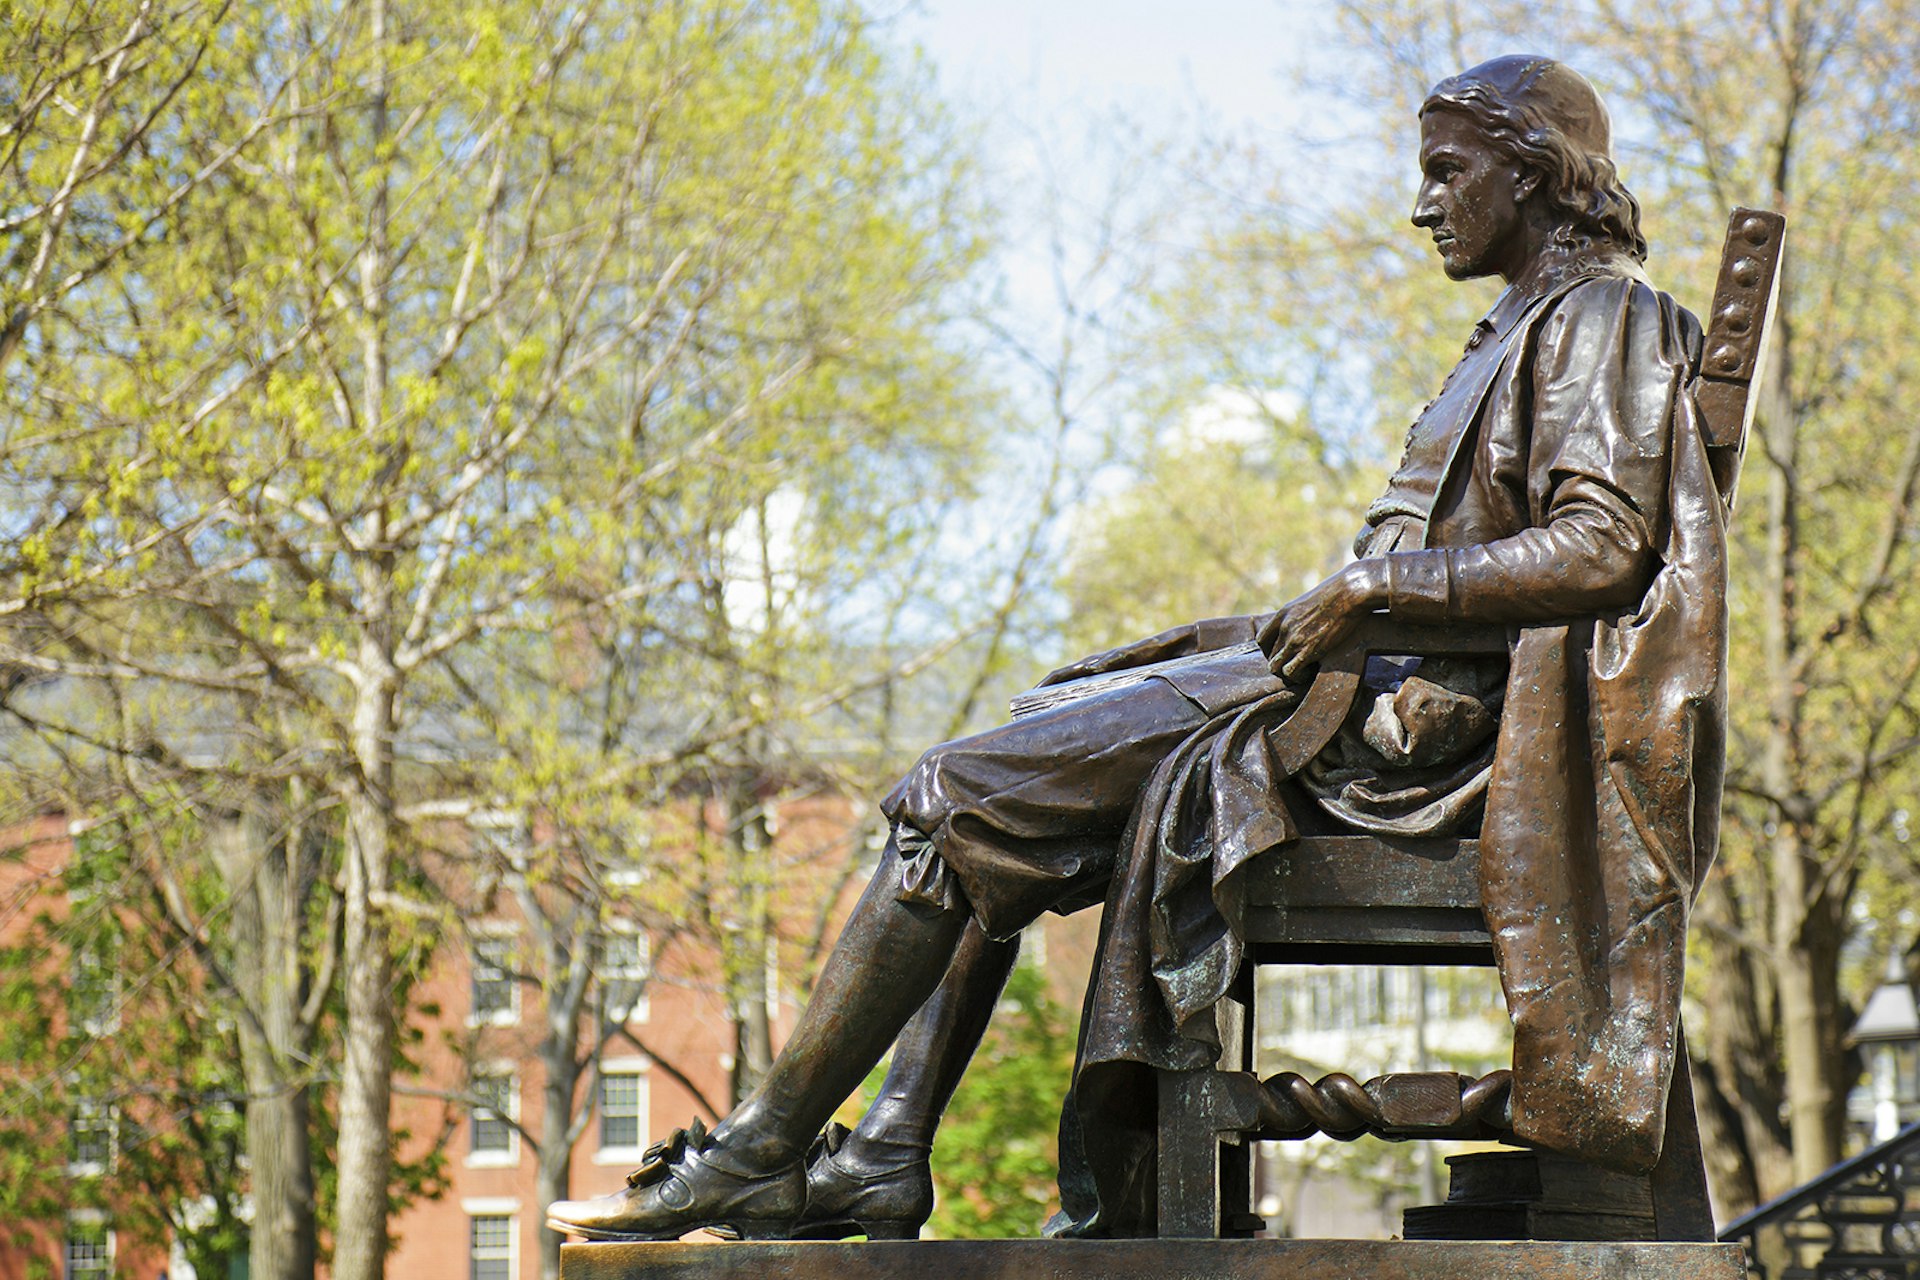 side view of bronze statue of a 17th century American man, John Harvard, with Harvard's red-brick buildings in the background